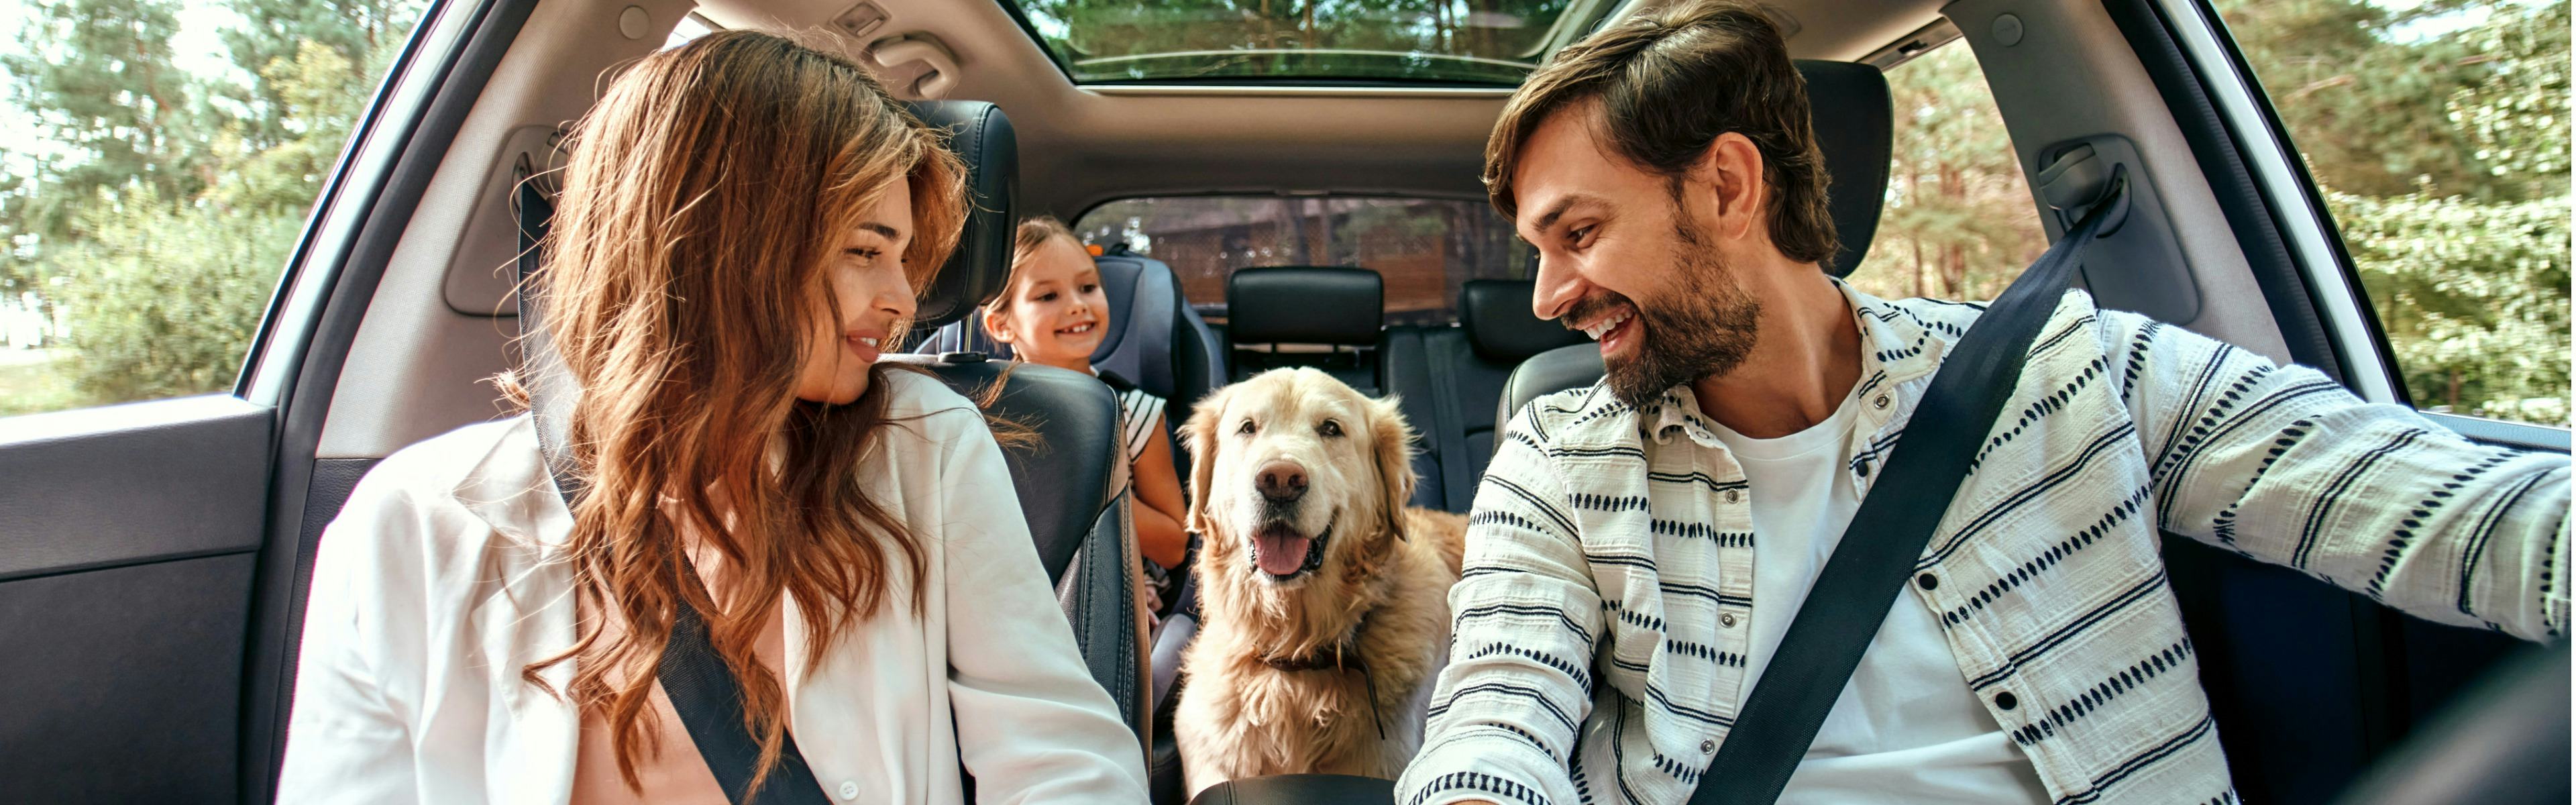 family in a car with their dog